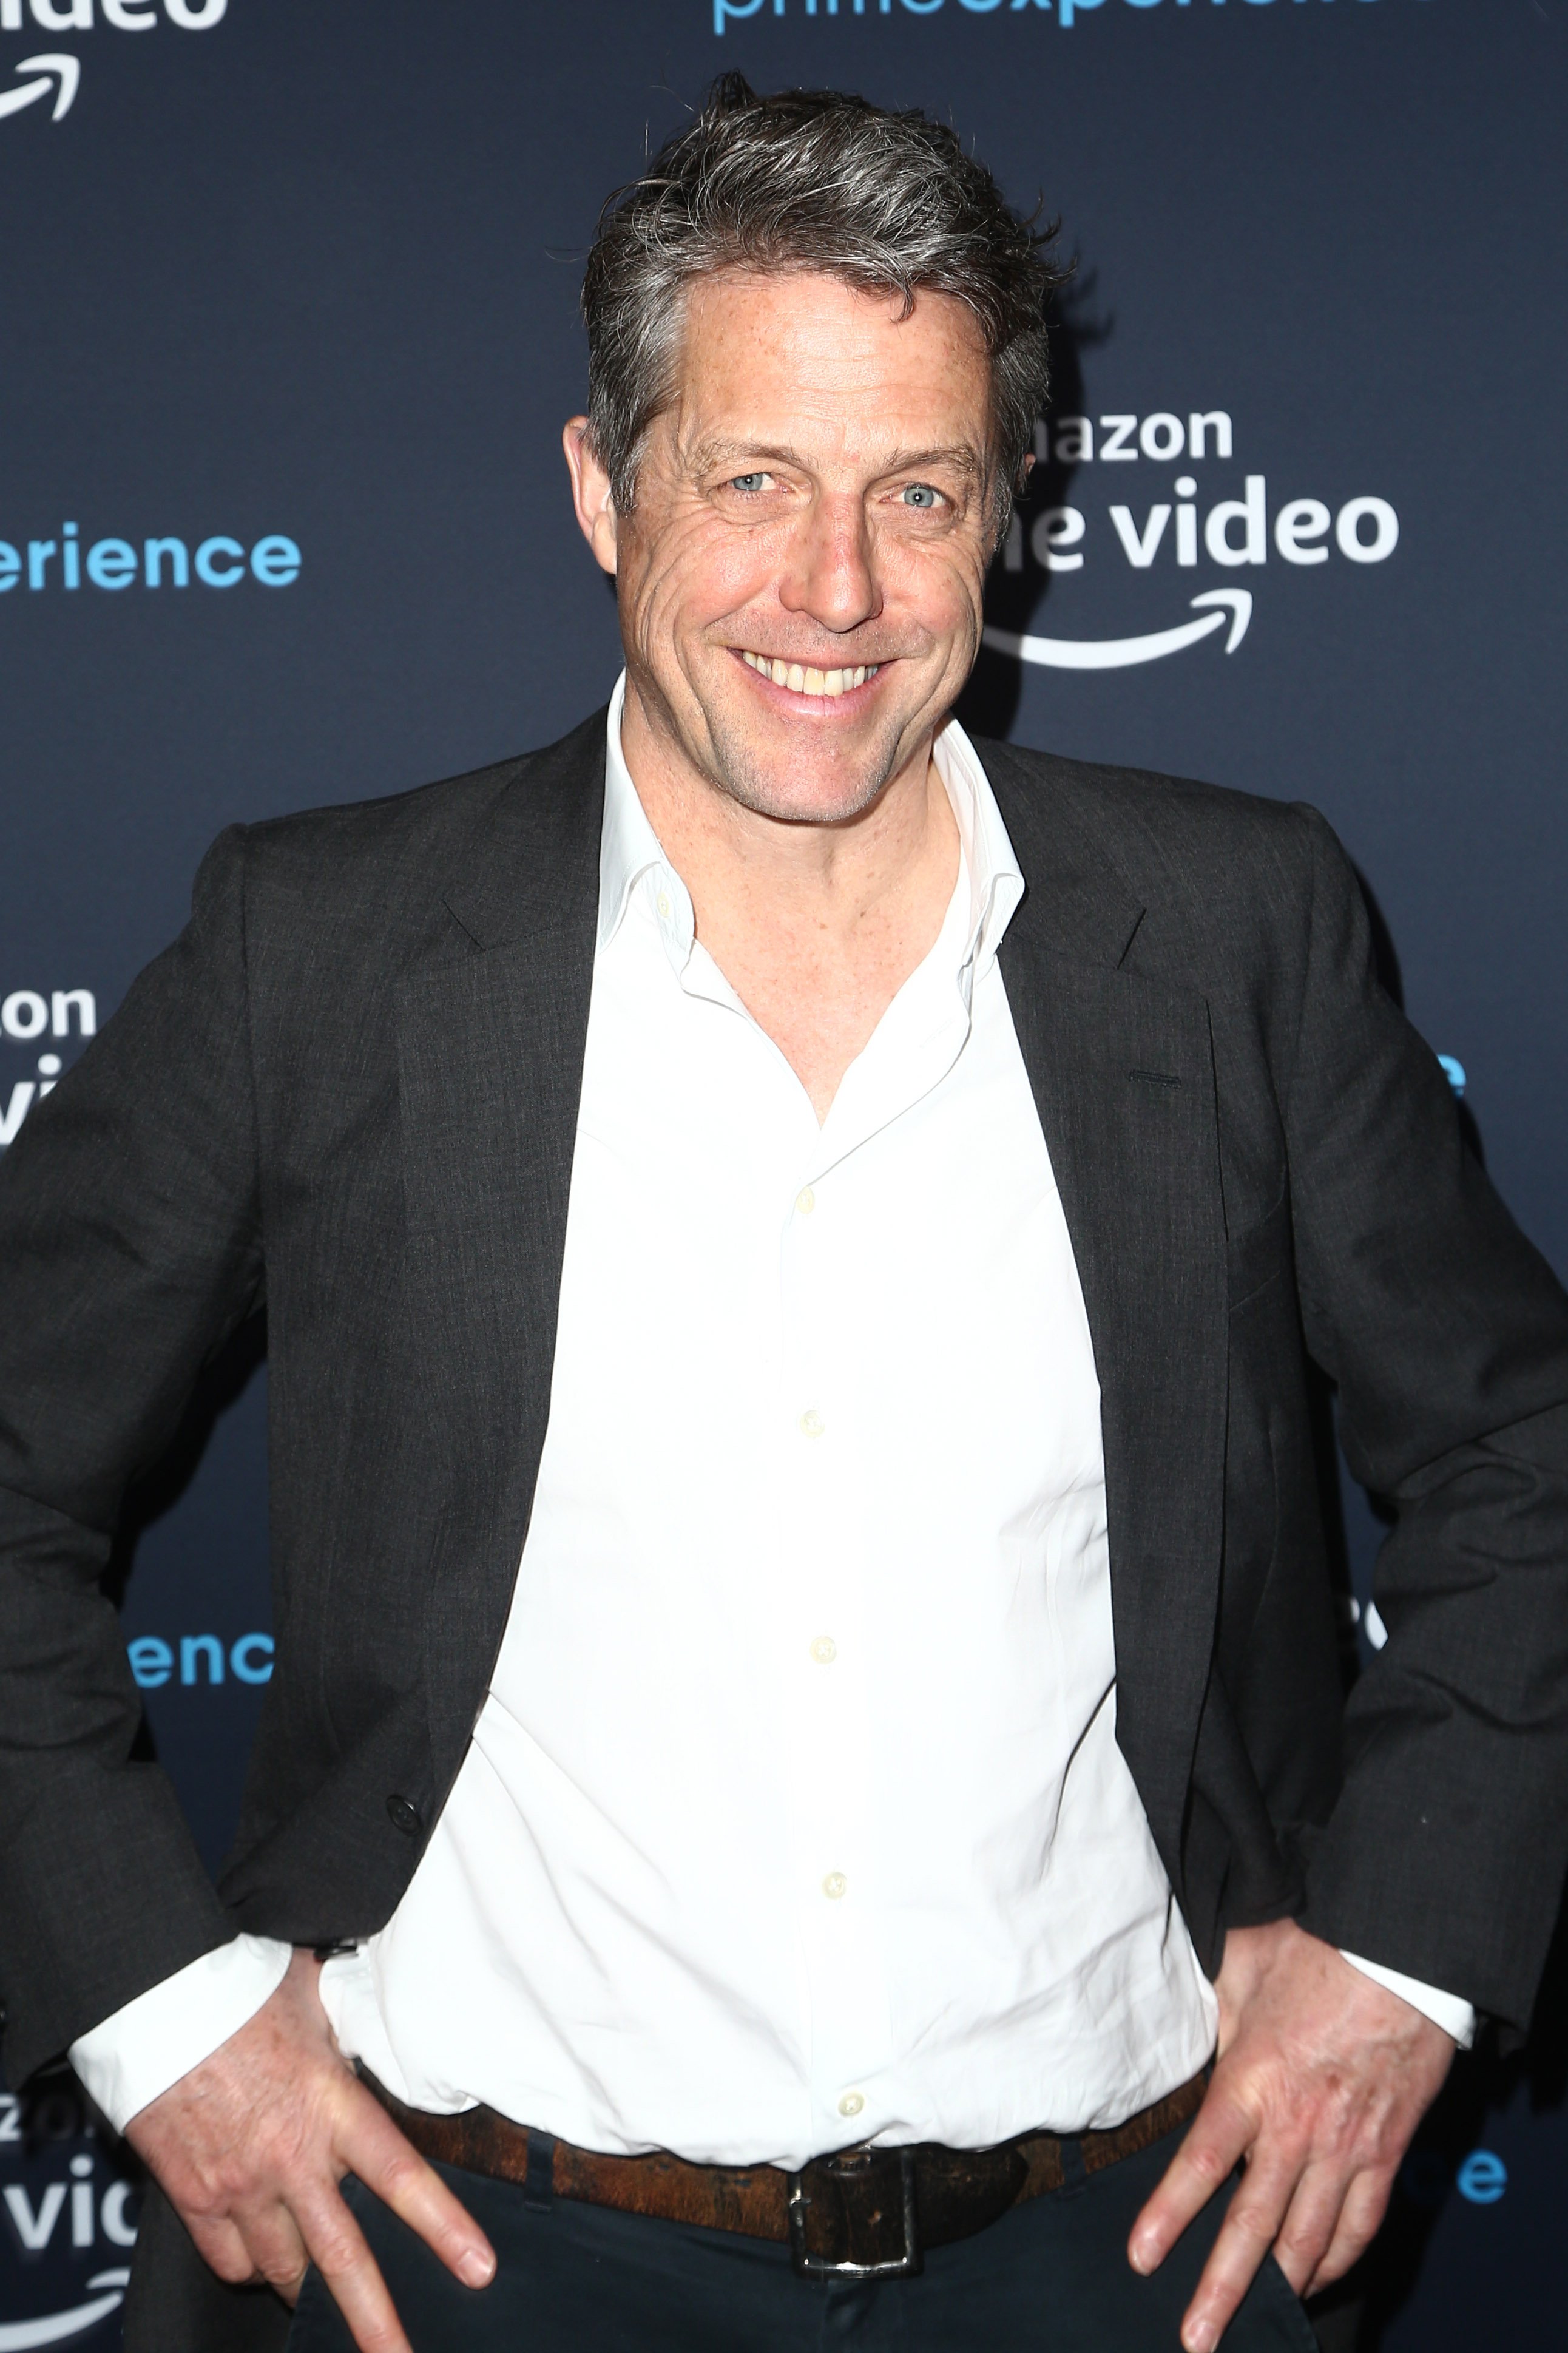 Hugh Grant attends the Amazon Prime Experience Hosts "A Very English Scandal" FYC Screening And Panel at Hollywood Athletic Club on April 28, 2019, in Hollywood, California. | Source: Getty Images